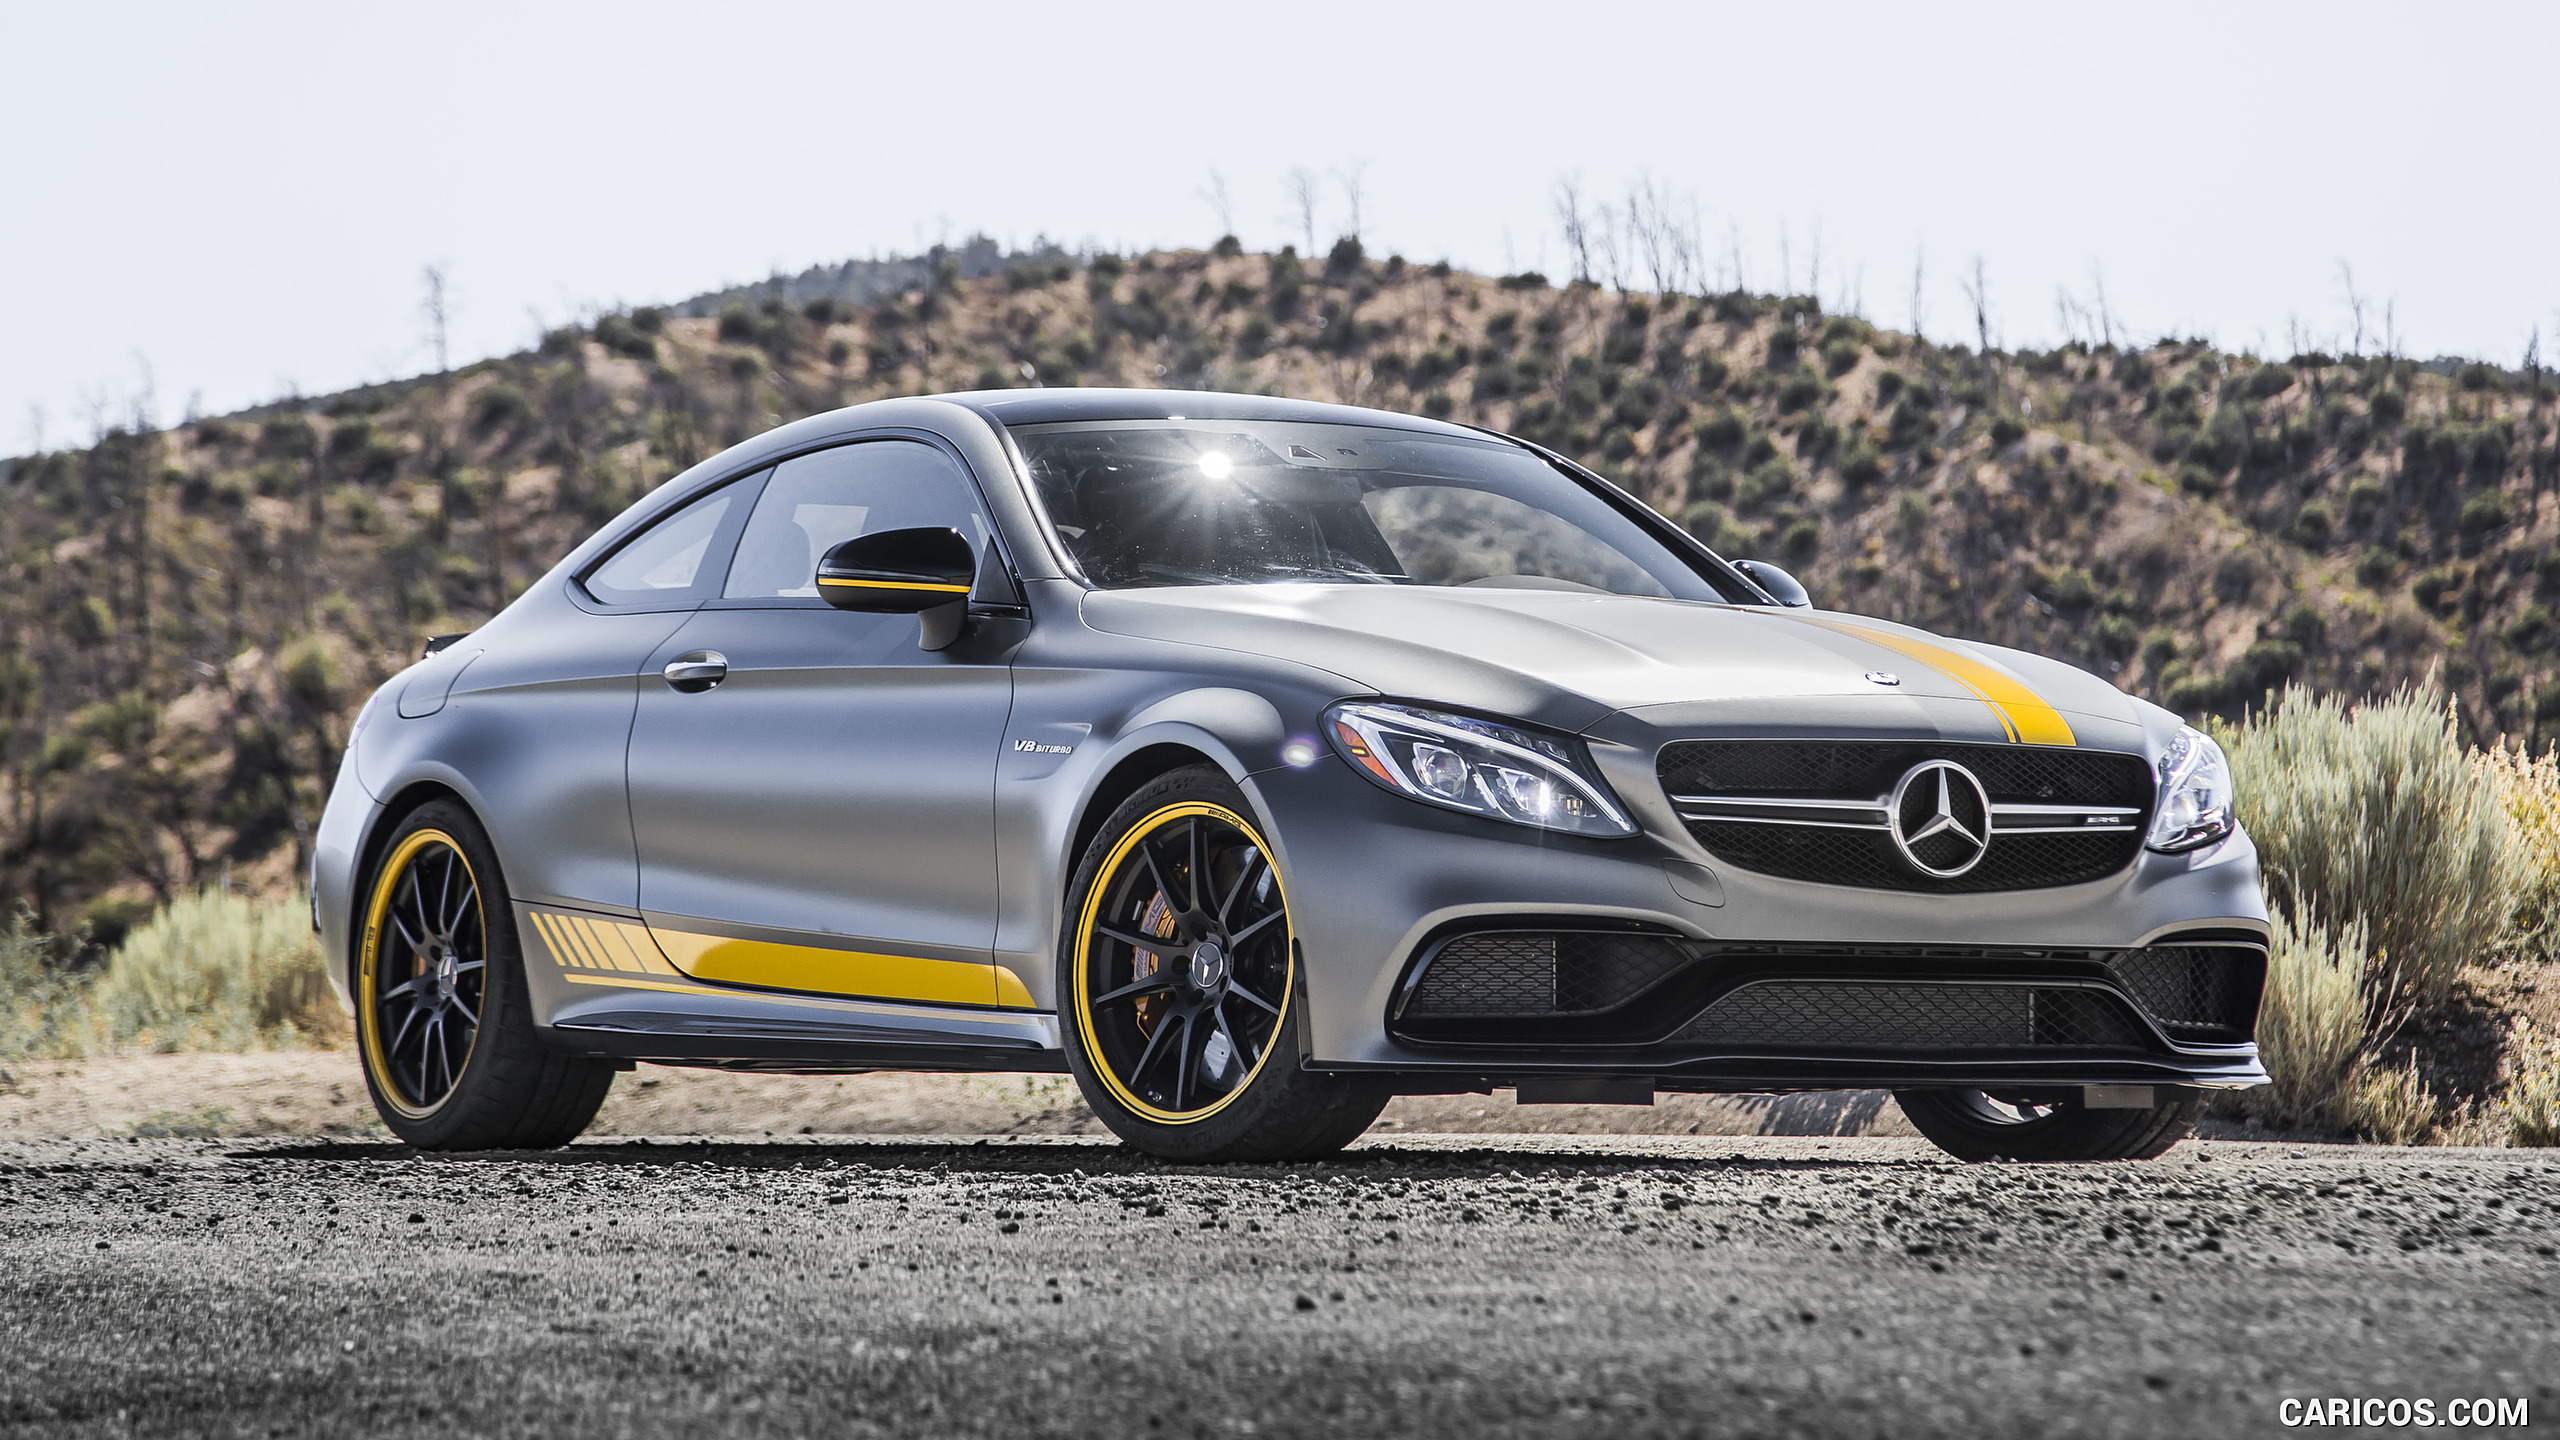 2017 Mercedes-AMG C63 S Coupe Edition One (US-Spec) - Front Three-Quarter, #14 of 86